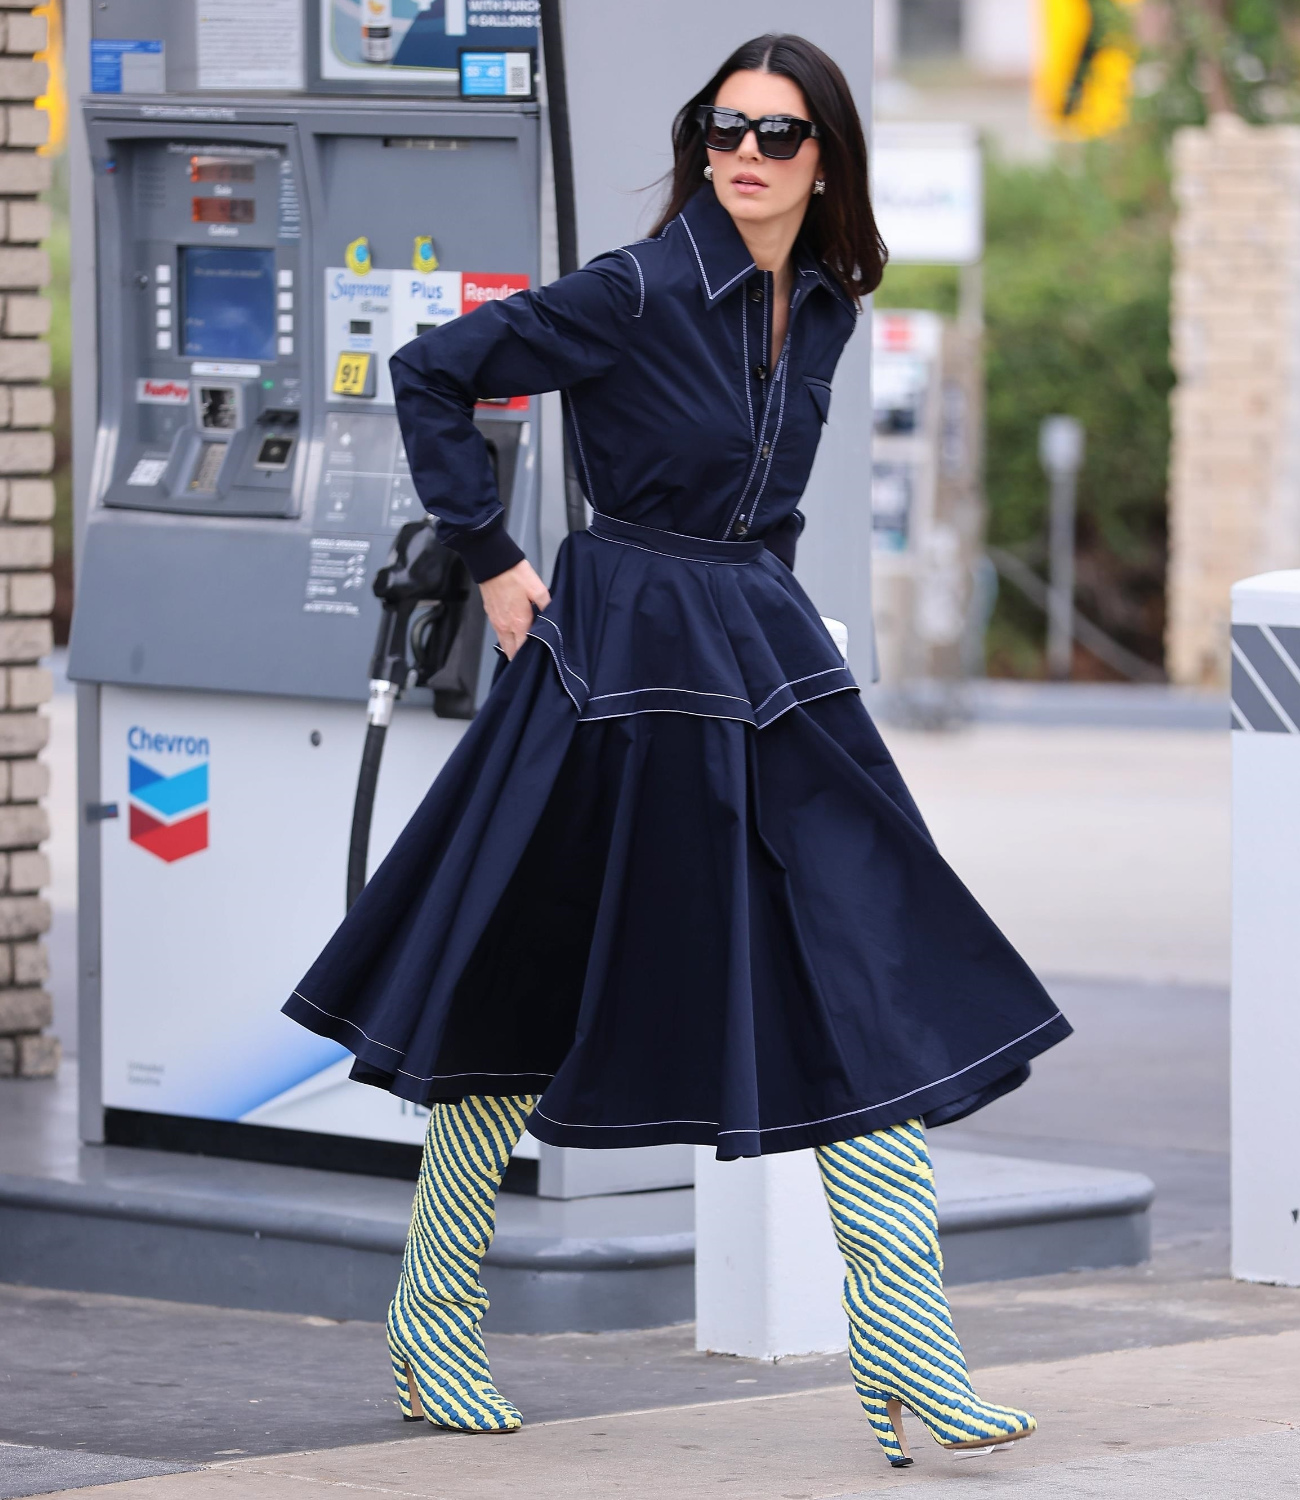 1698305349-kendall-jenner-gas-station-outfit-002.jpg